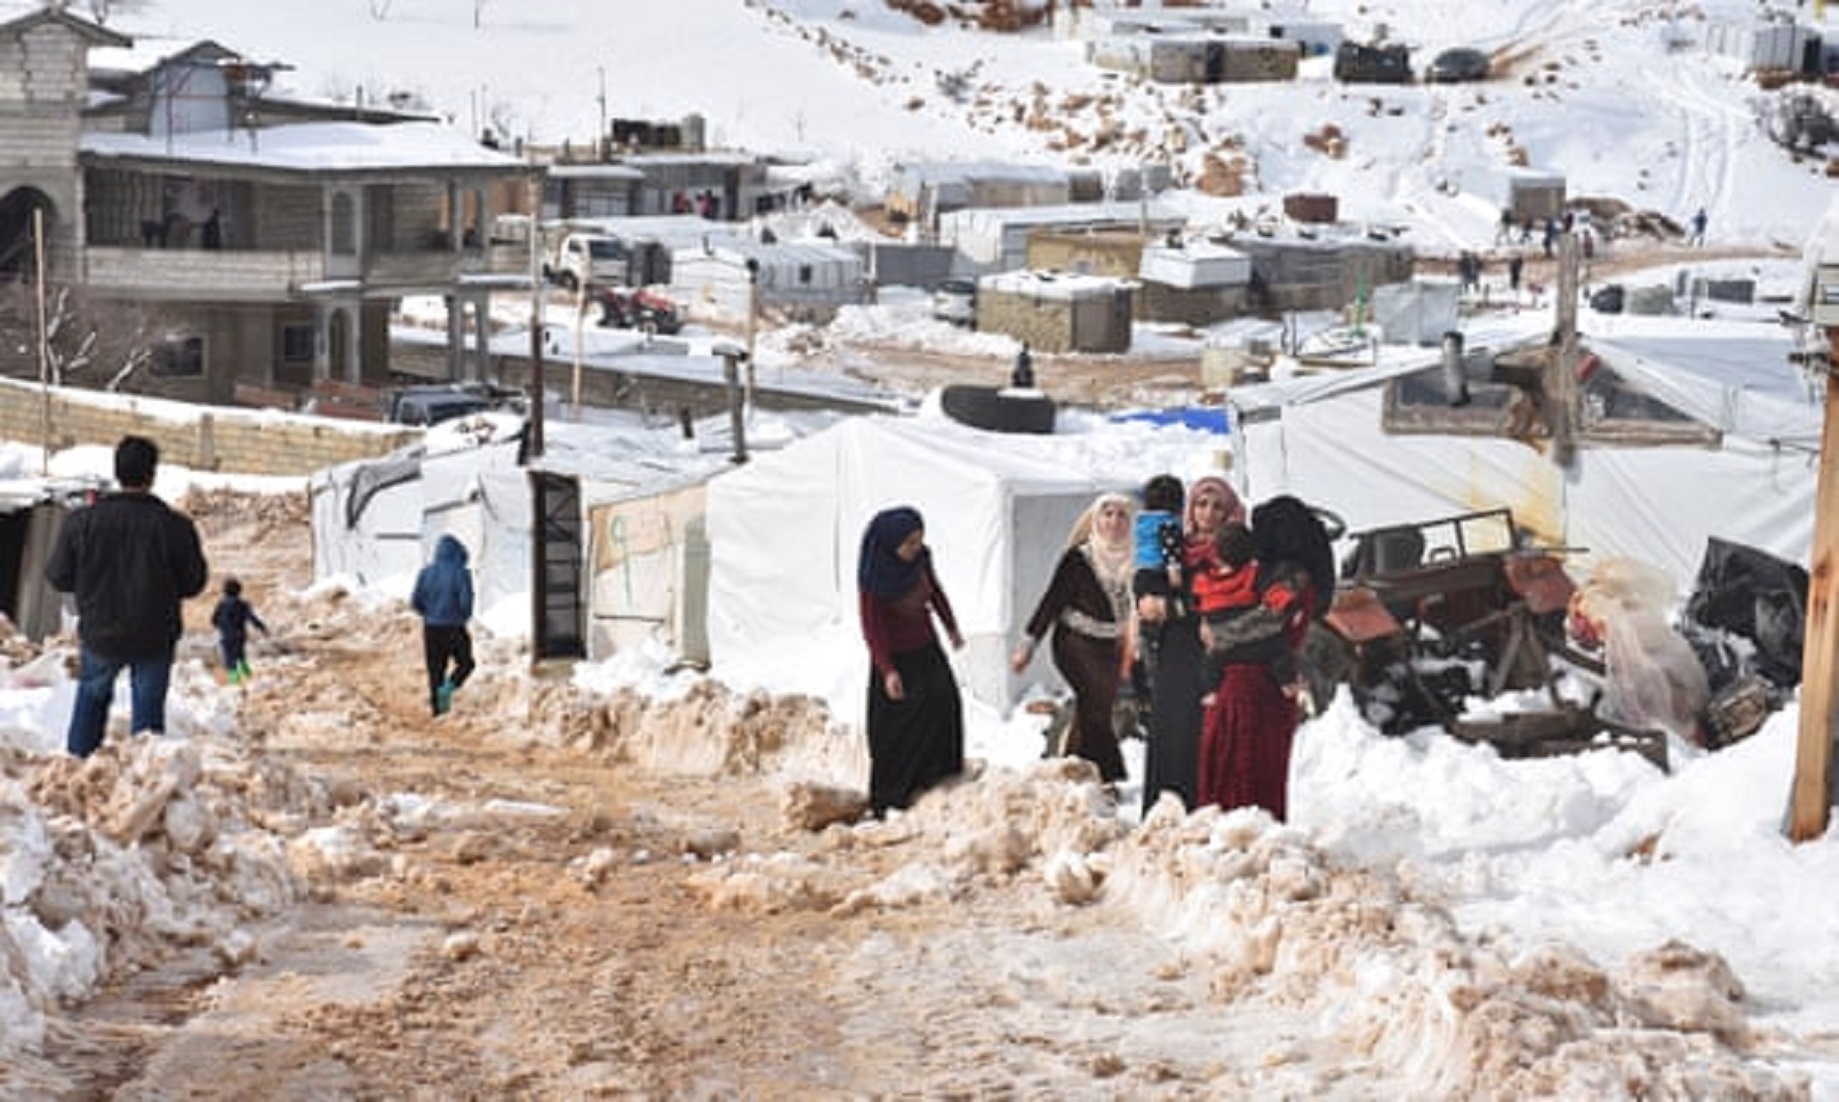 UN, Partners Aid Displaced People Suffering In Deadly N. Syria Winter